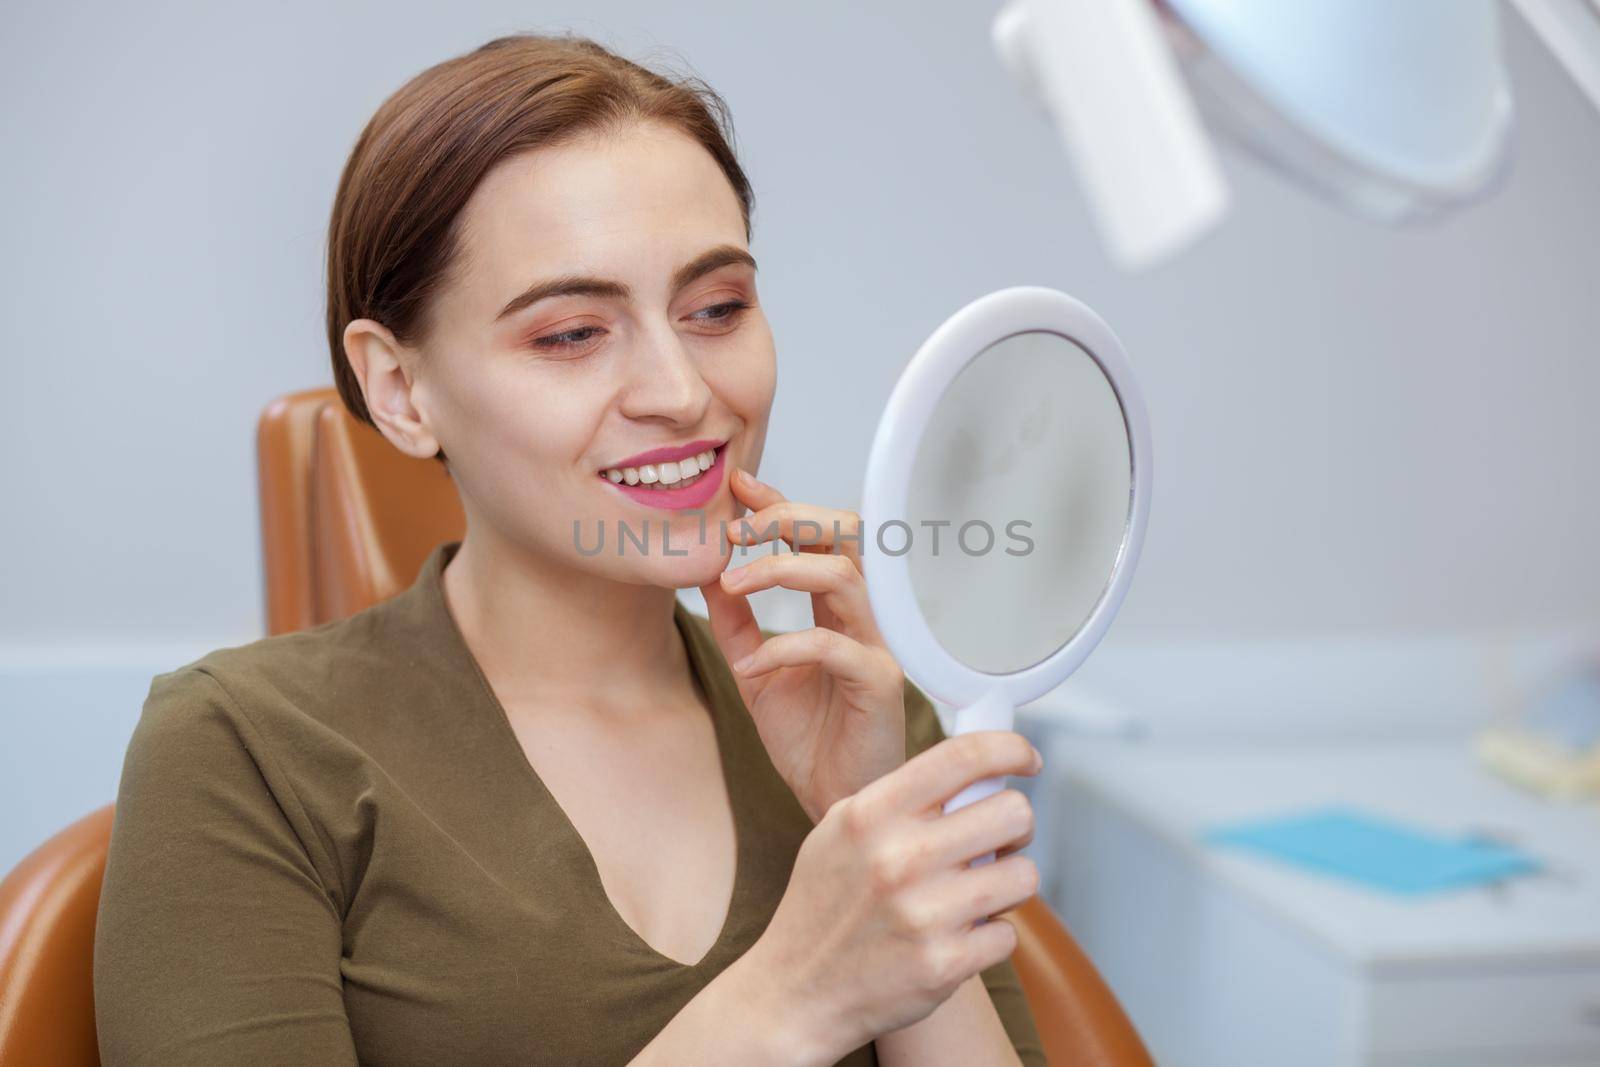 Attractive young woman smiling, examining her teeth in the mirror, while visiting dentist. Woman enjoying result of professional teeth cleaning and whitening, copy space. Health, wellness concept